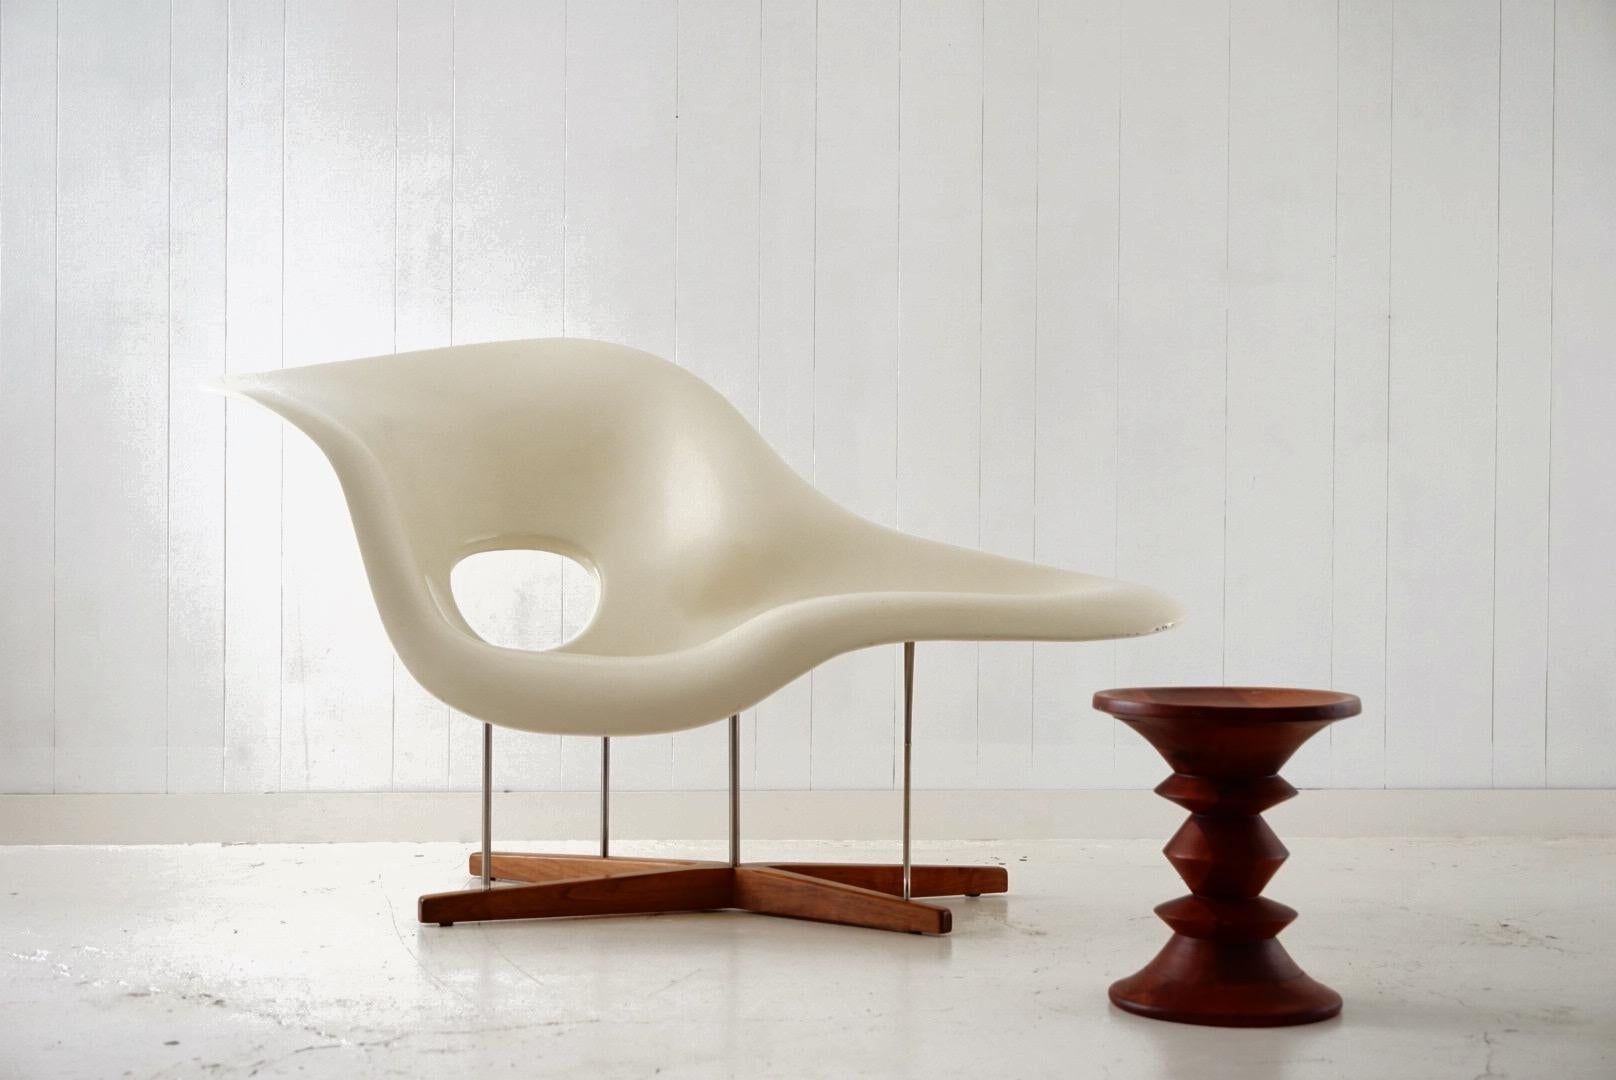 An incredible example of innovative design by Ray and Charles Eames. The 'La Chaise' was the Eames's entry into the Museum of Modern Art’s 1948 'International Competition for Low Cost Furniture Design'. Paying homage and named after Gaston